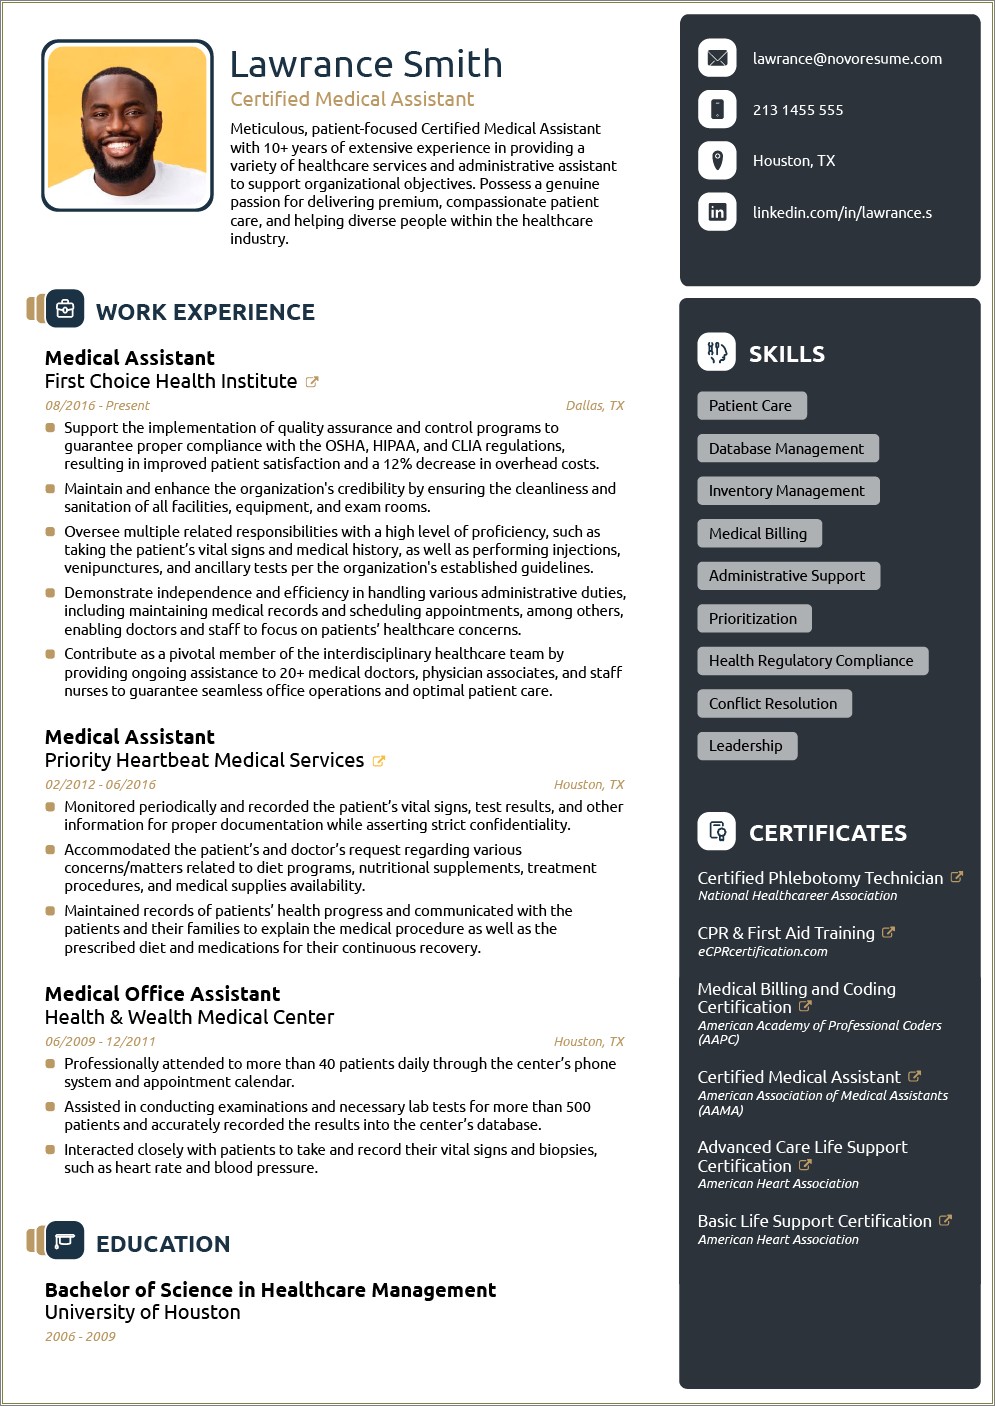 Free Information Technology Resume Templates